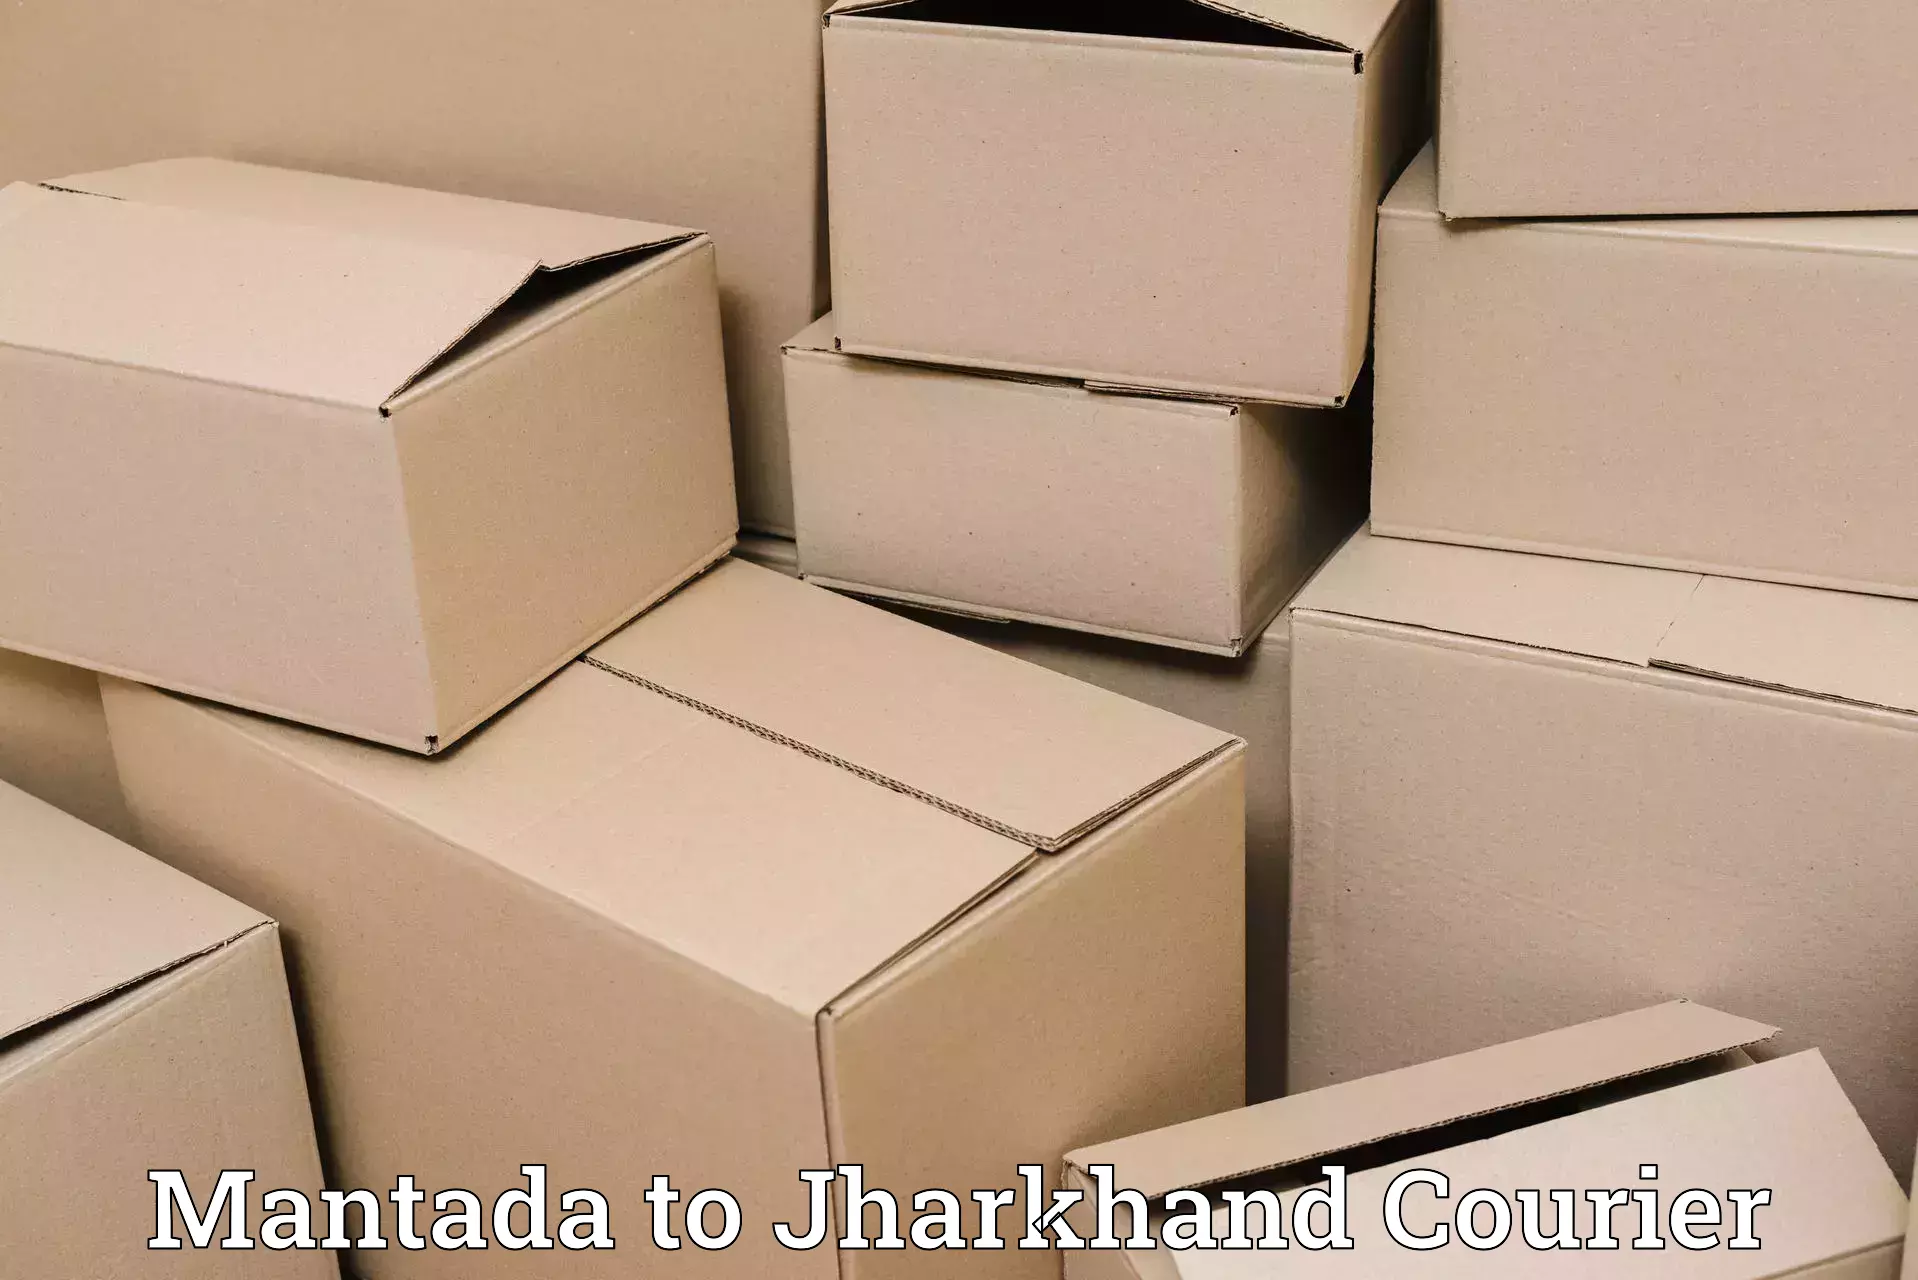 Overnight delivery services in Mantada to Kedla